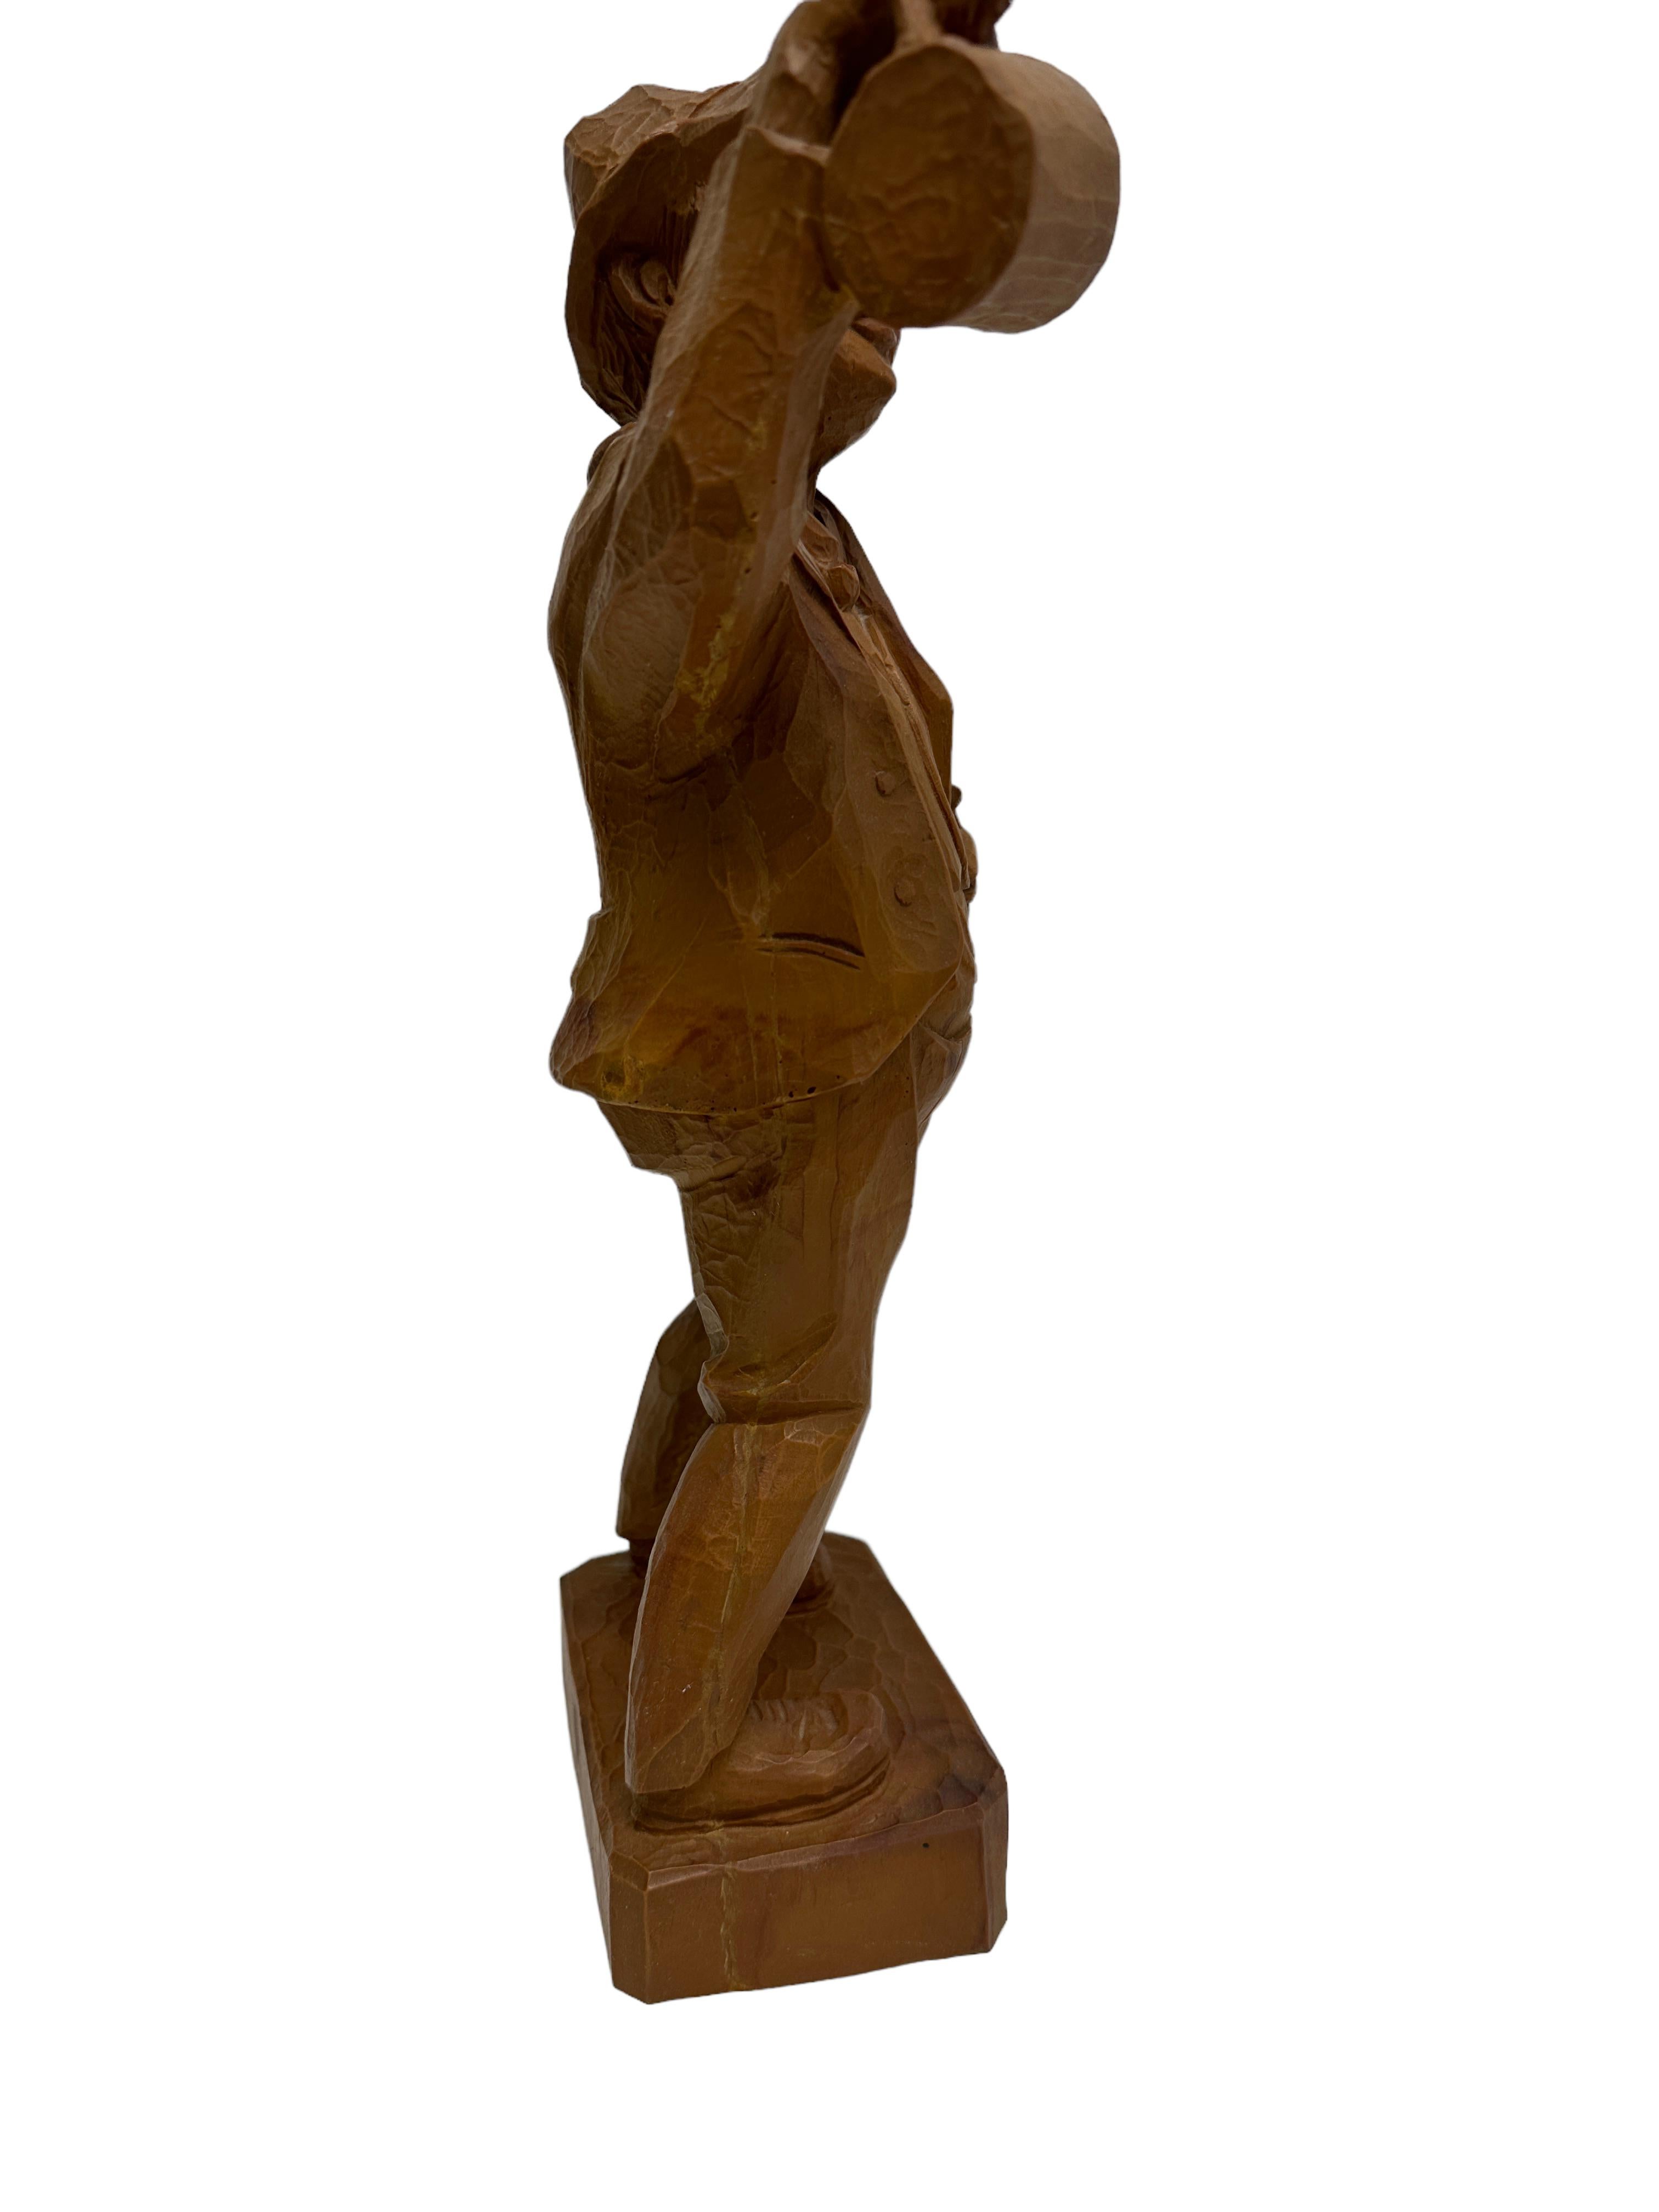 Black Forest Folk Art 20th Century Carved Wood Man Holding a Beer Stein, Austria 1960s For Sale